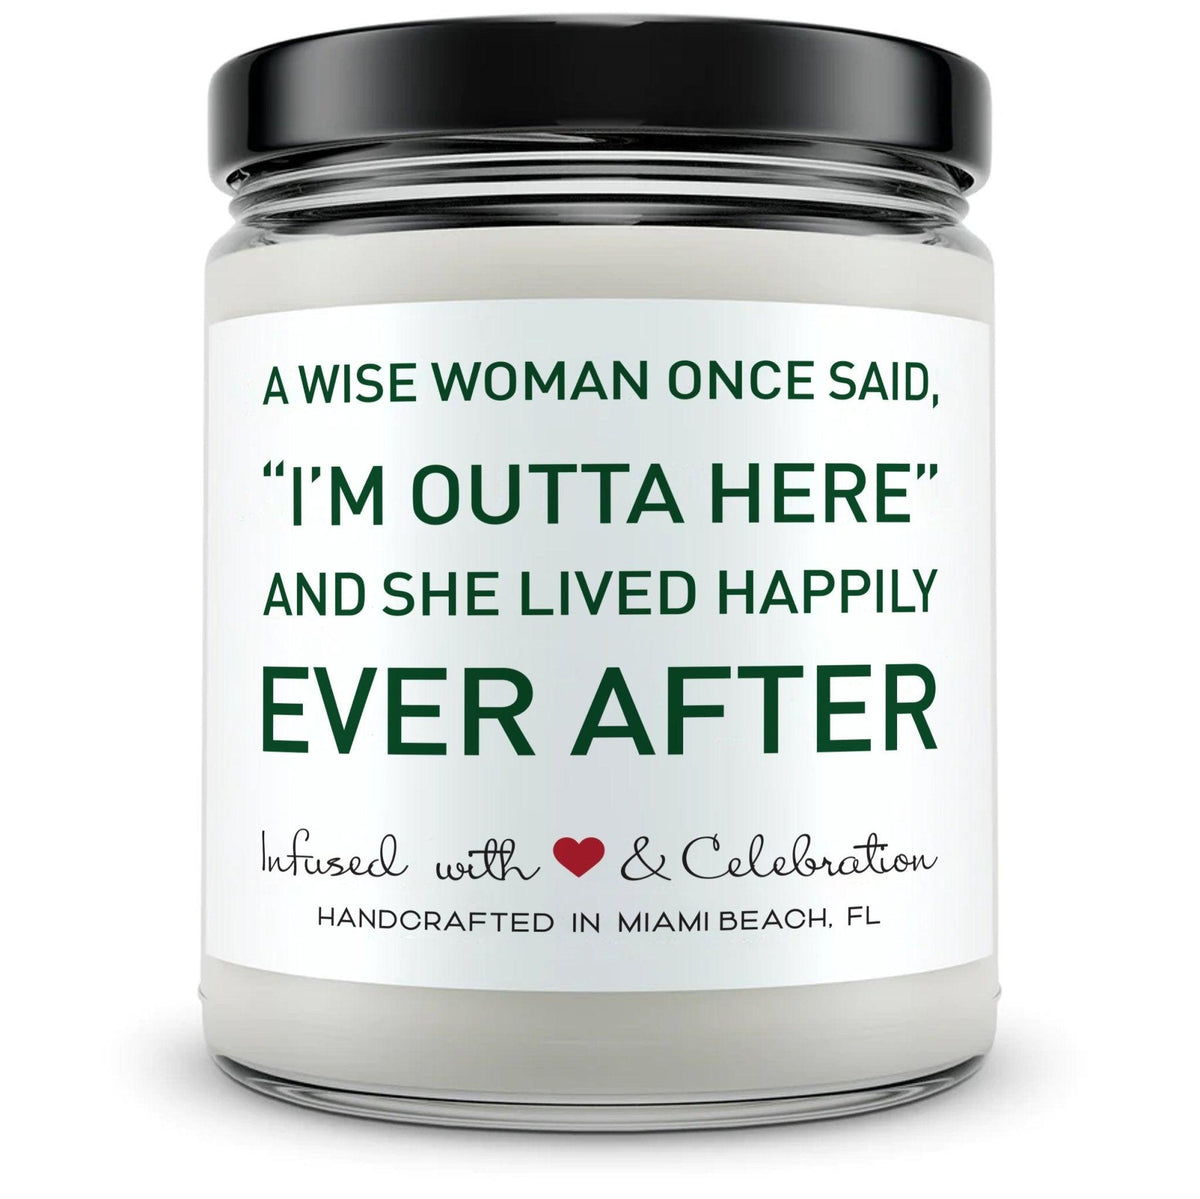 A wise woman once said, "I'm outta here"... - Mint Sugar Candle